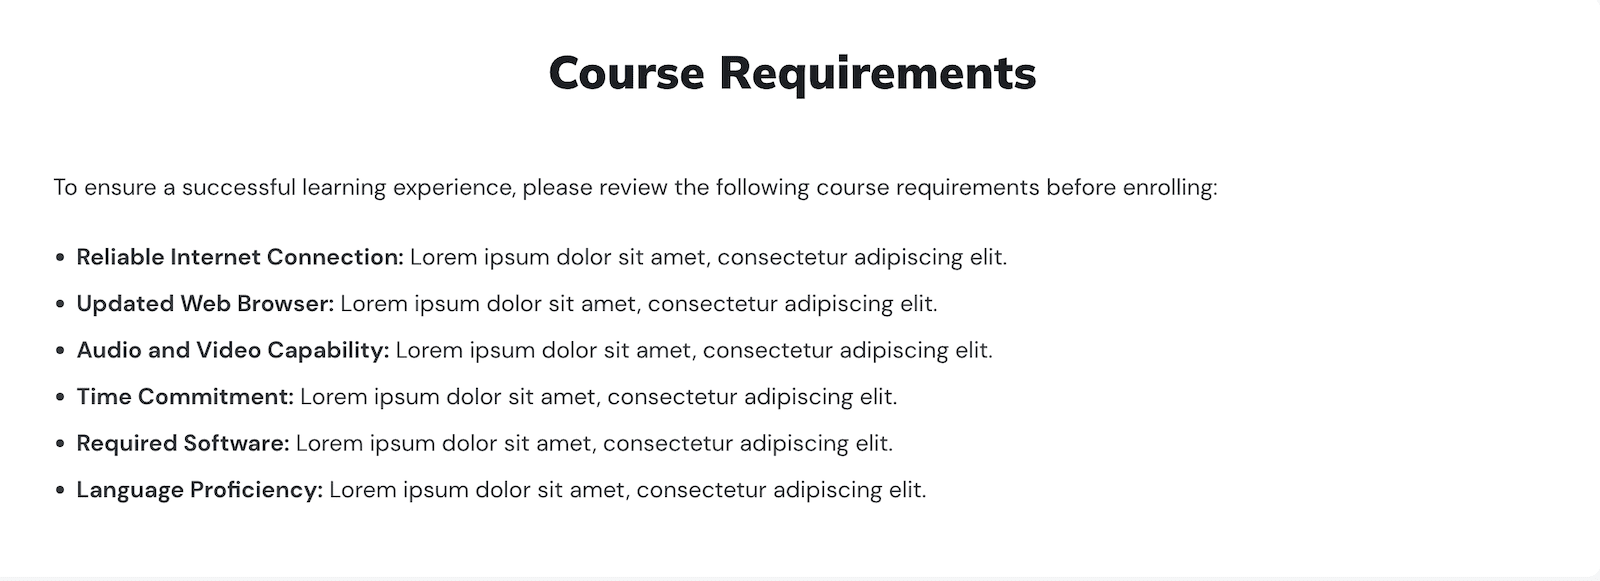 moodle-theme-course-landing-page-requirements-section